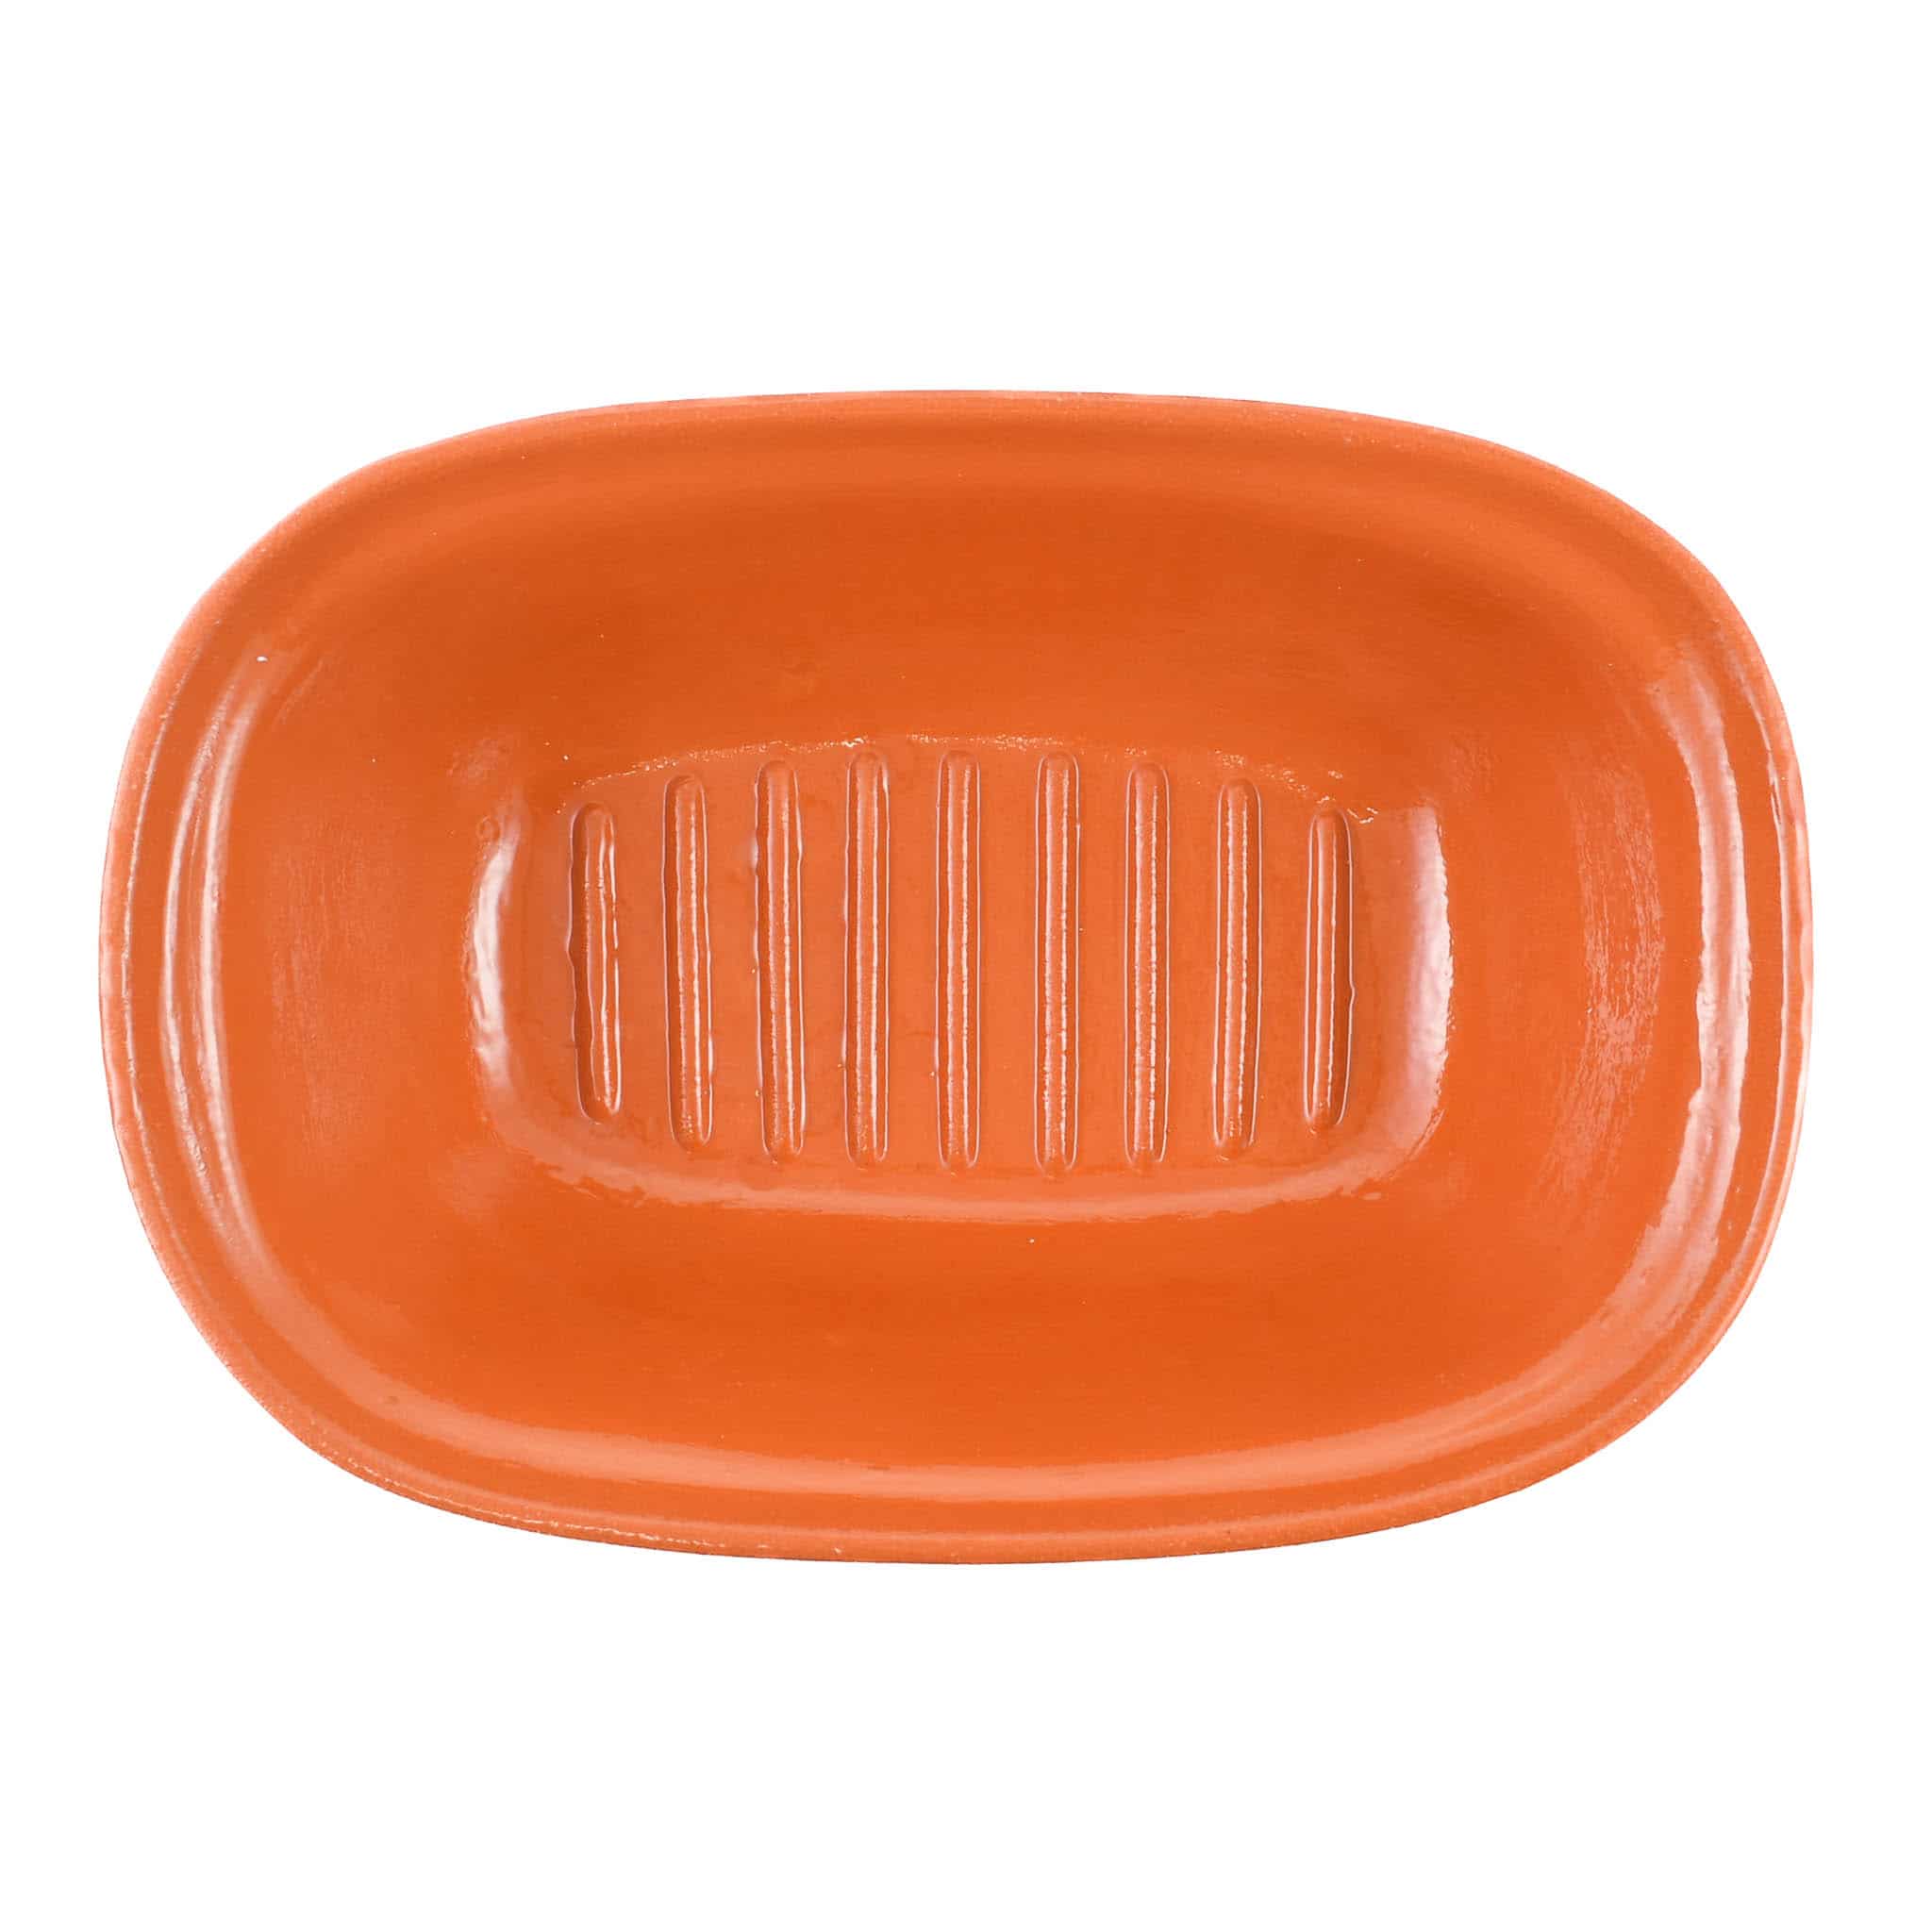 Terracotta Red Rooster Roasting Dish, 32cm